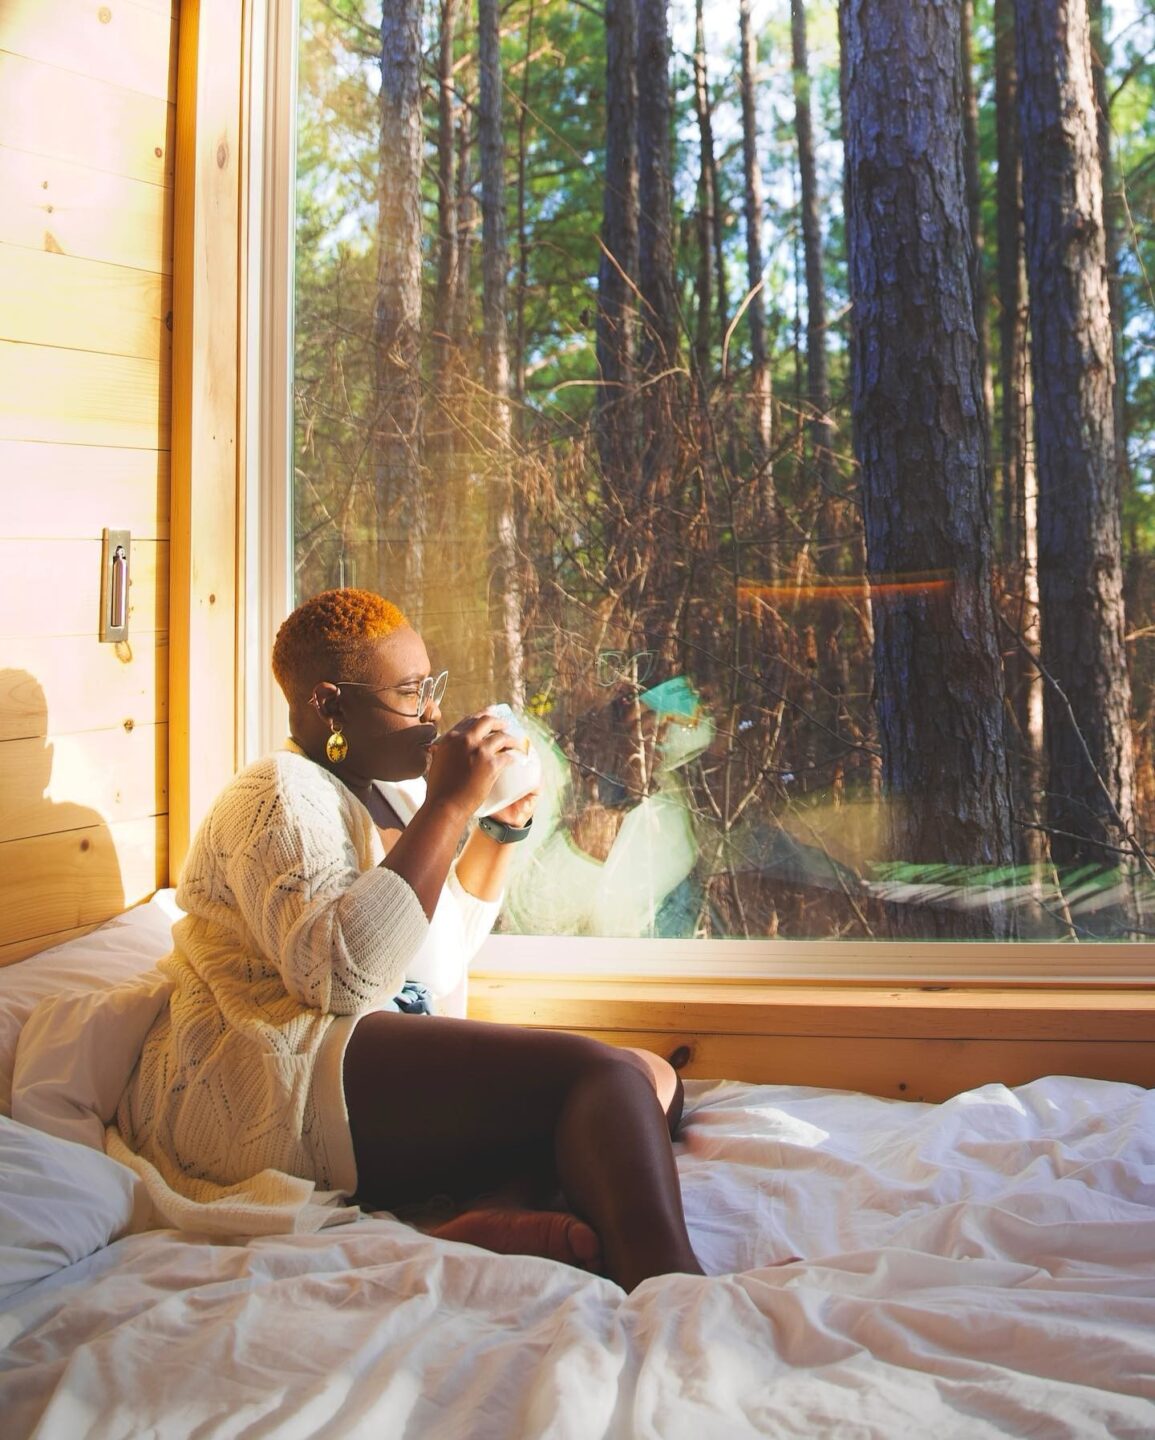 Woman sits on bed by big window looking into nature sipping a cup of coffee.